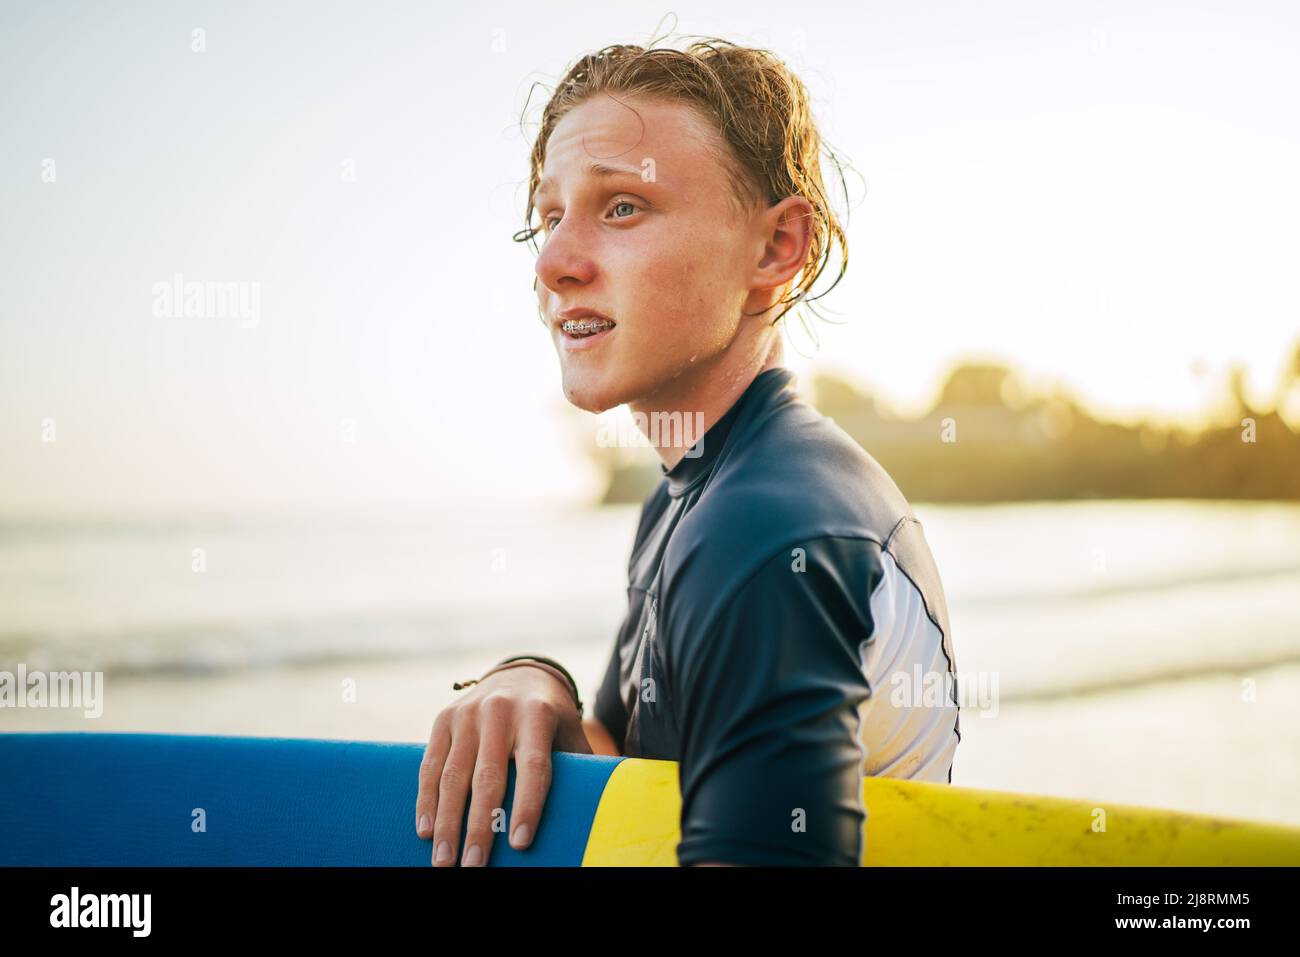 Portrait of a teen boy with Dental braces and wet hair with a surfboard goes for surfing. He is smiling and walking into the water. Happy boyhood and Stock Photo